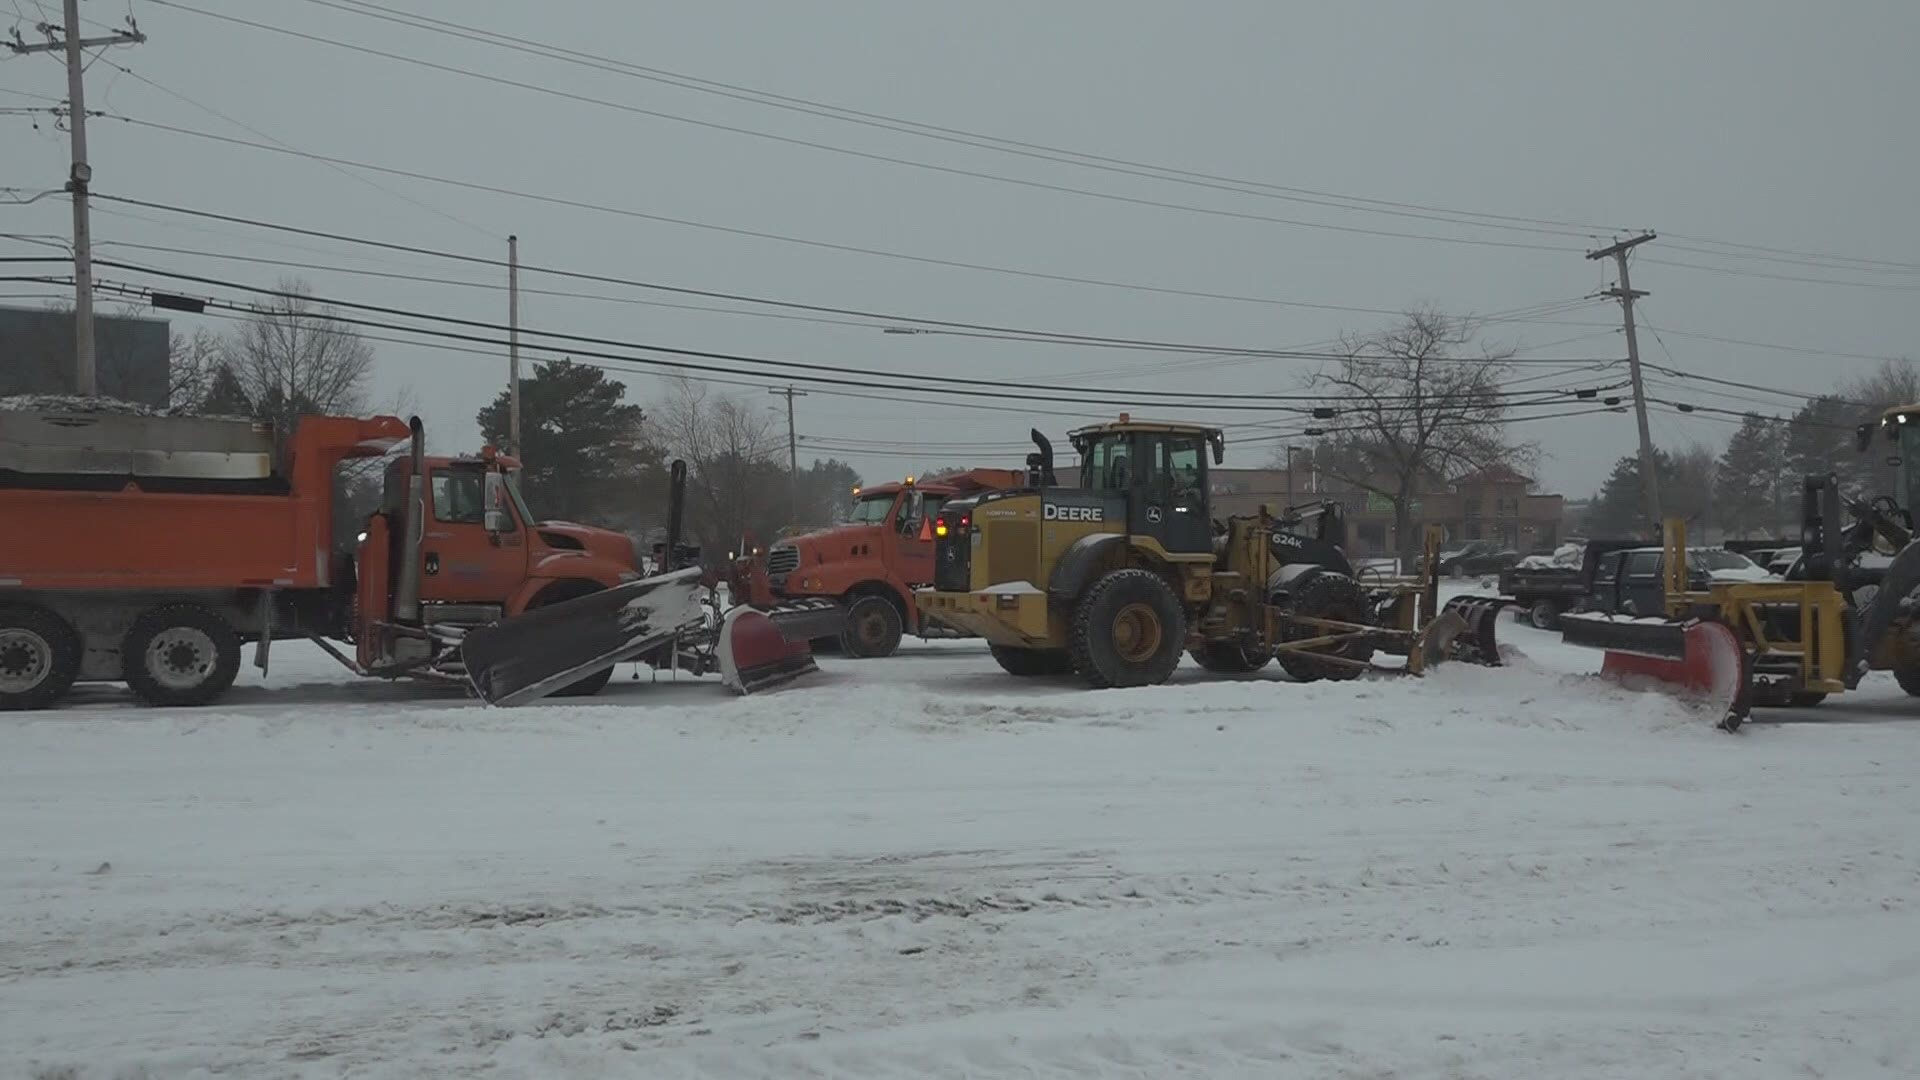 A parking ban will go into effect for both Downtown Bangor and for the rest of the city to allow plow truck drivers to easily clean the roads.